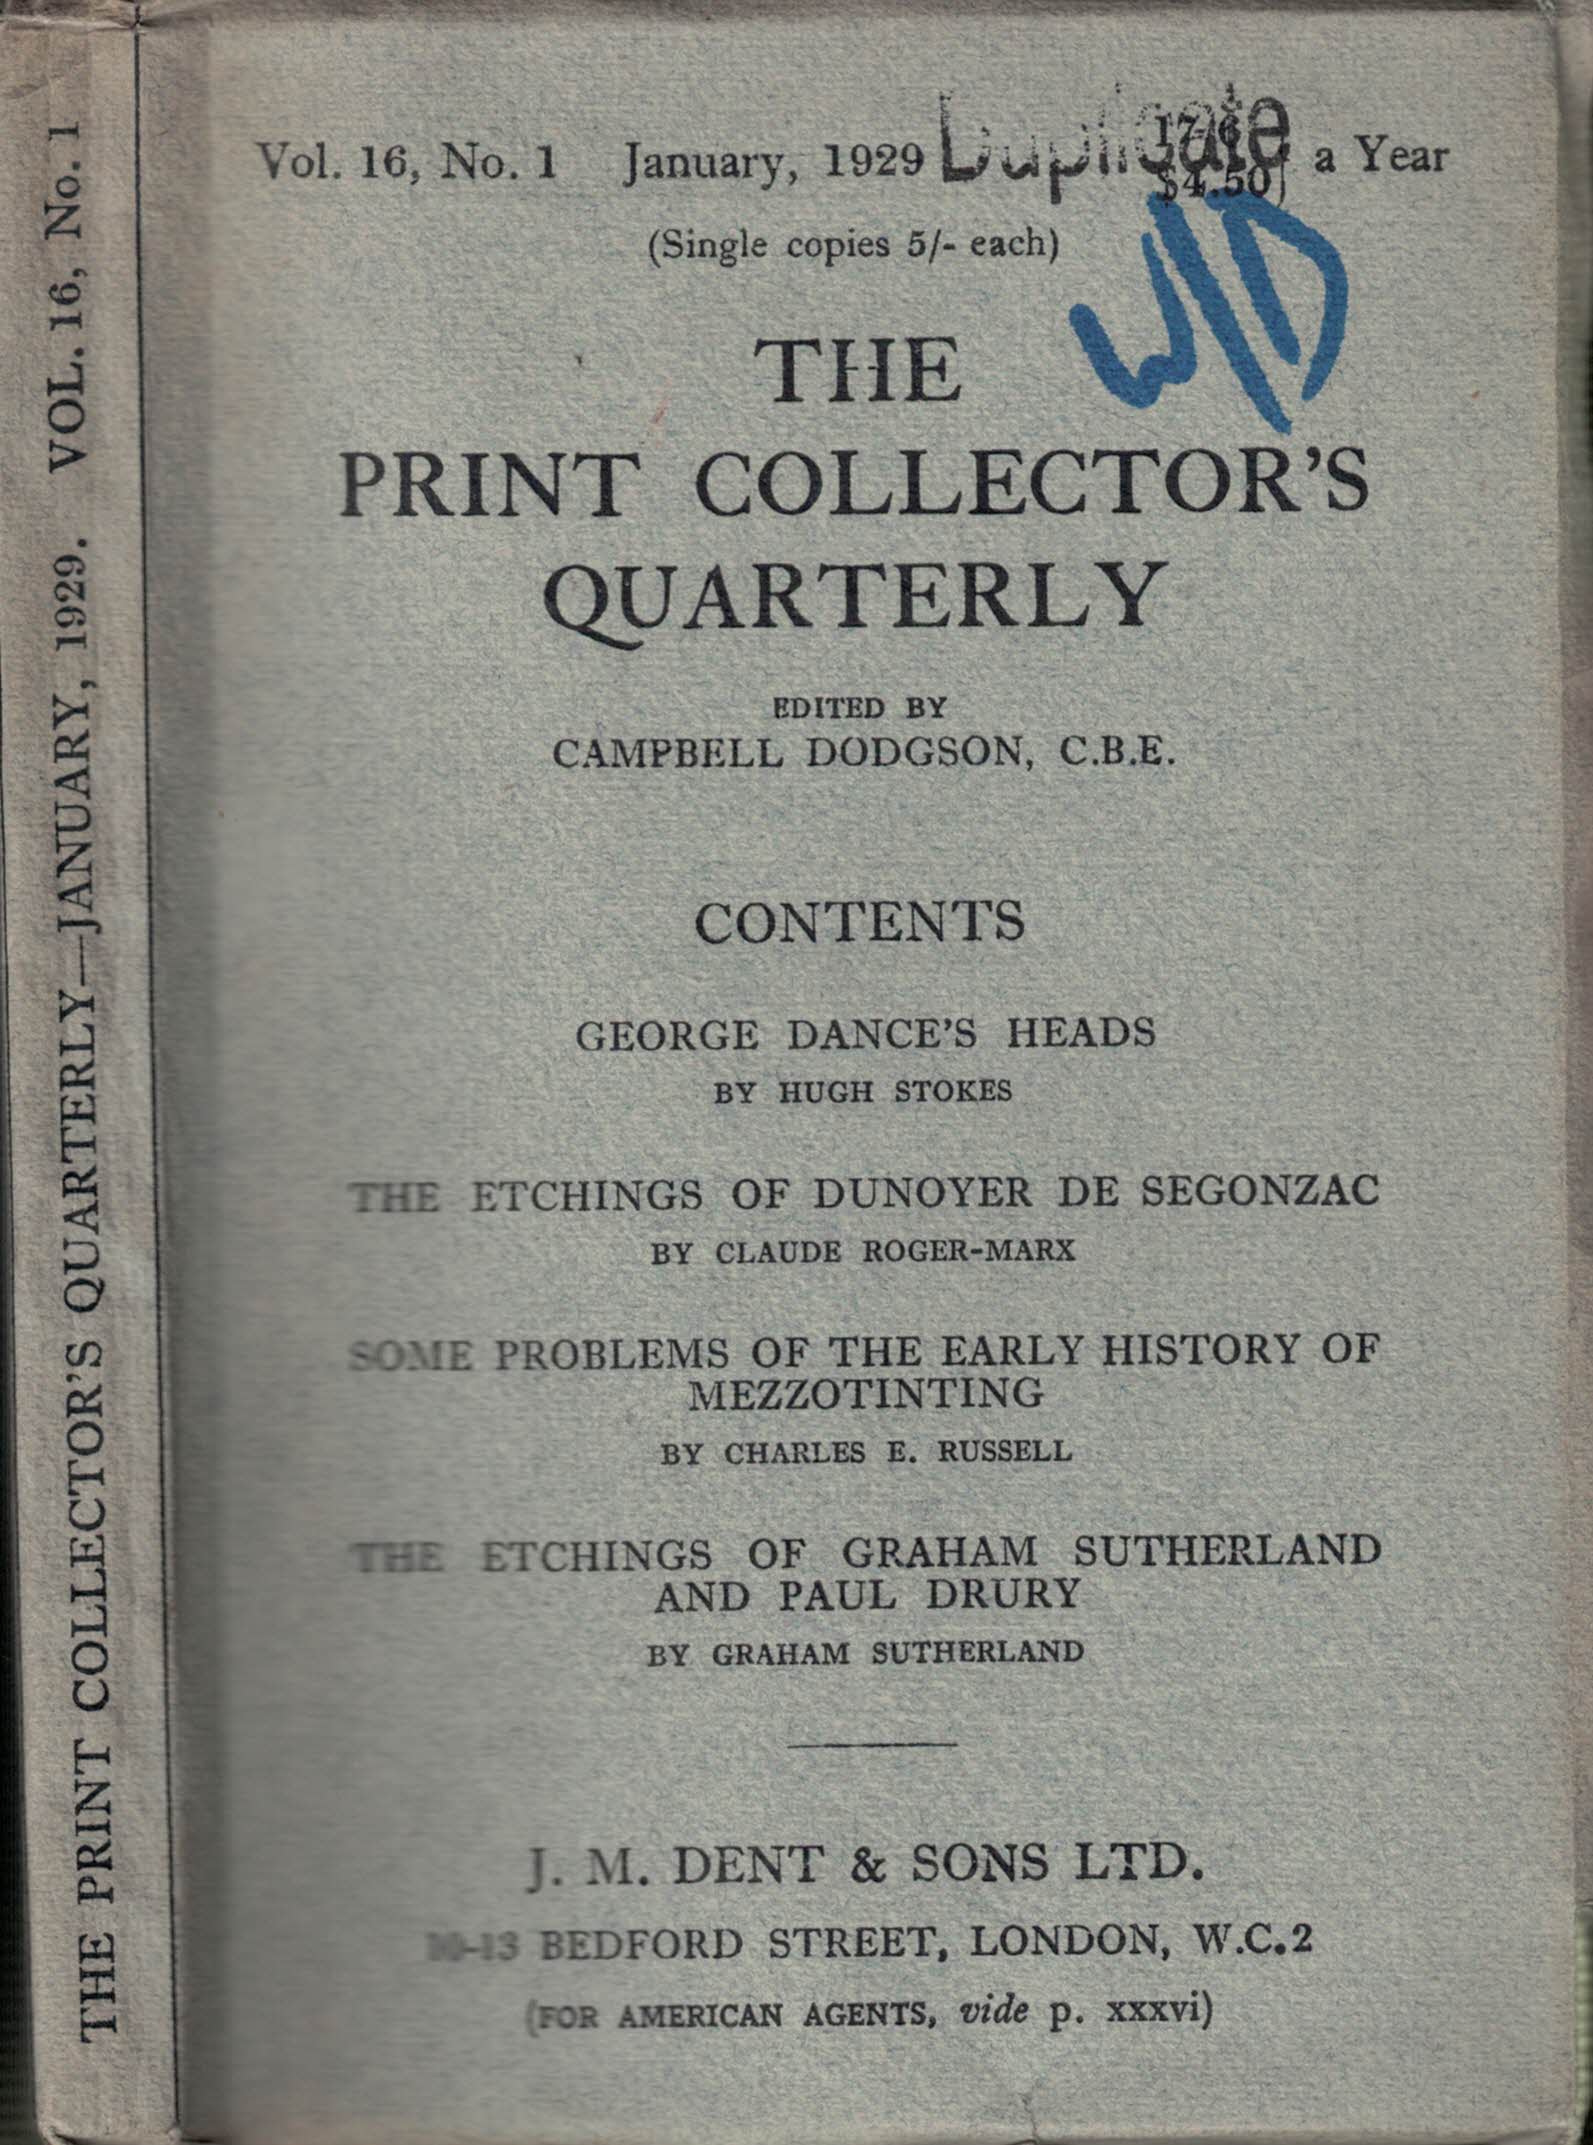 The Print Collector's Quarterly. Volume 16, No. 1. January 1929.